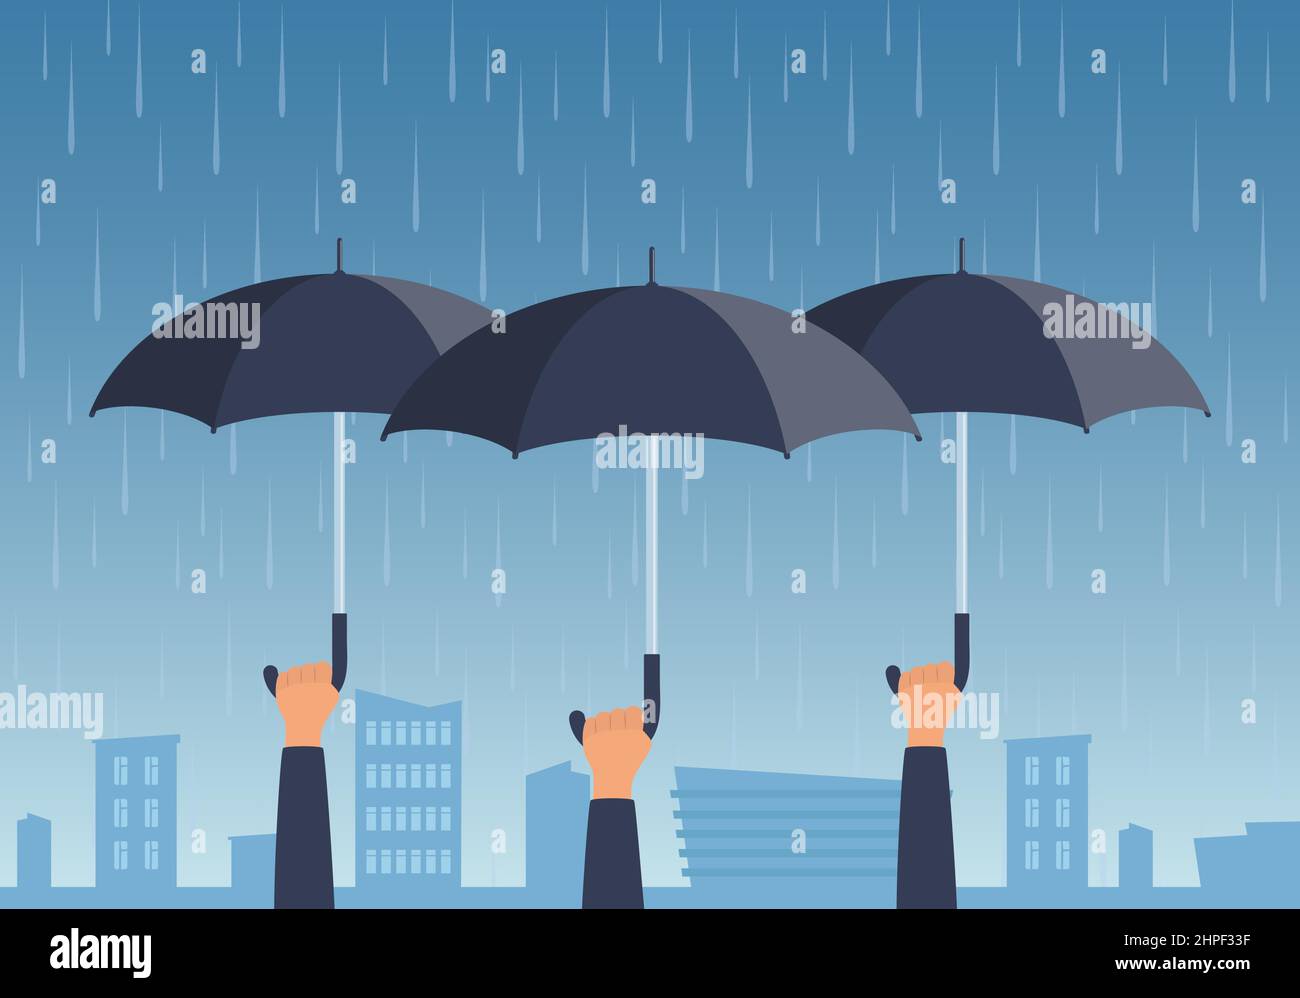 People hold umbrellas over the city in the rain. Hands holding open umbrellas. Concept vector Illustration Stock Vector